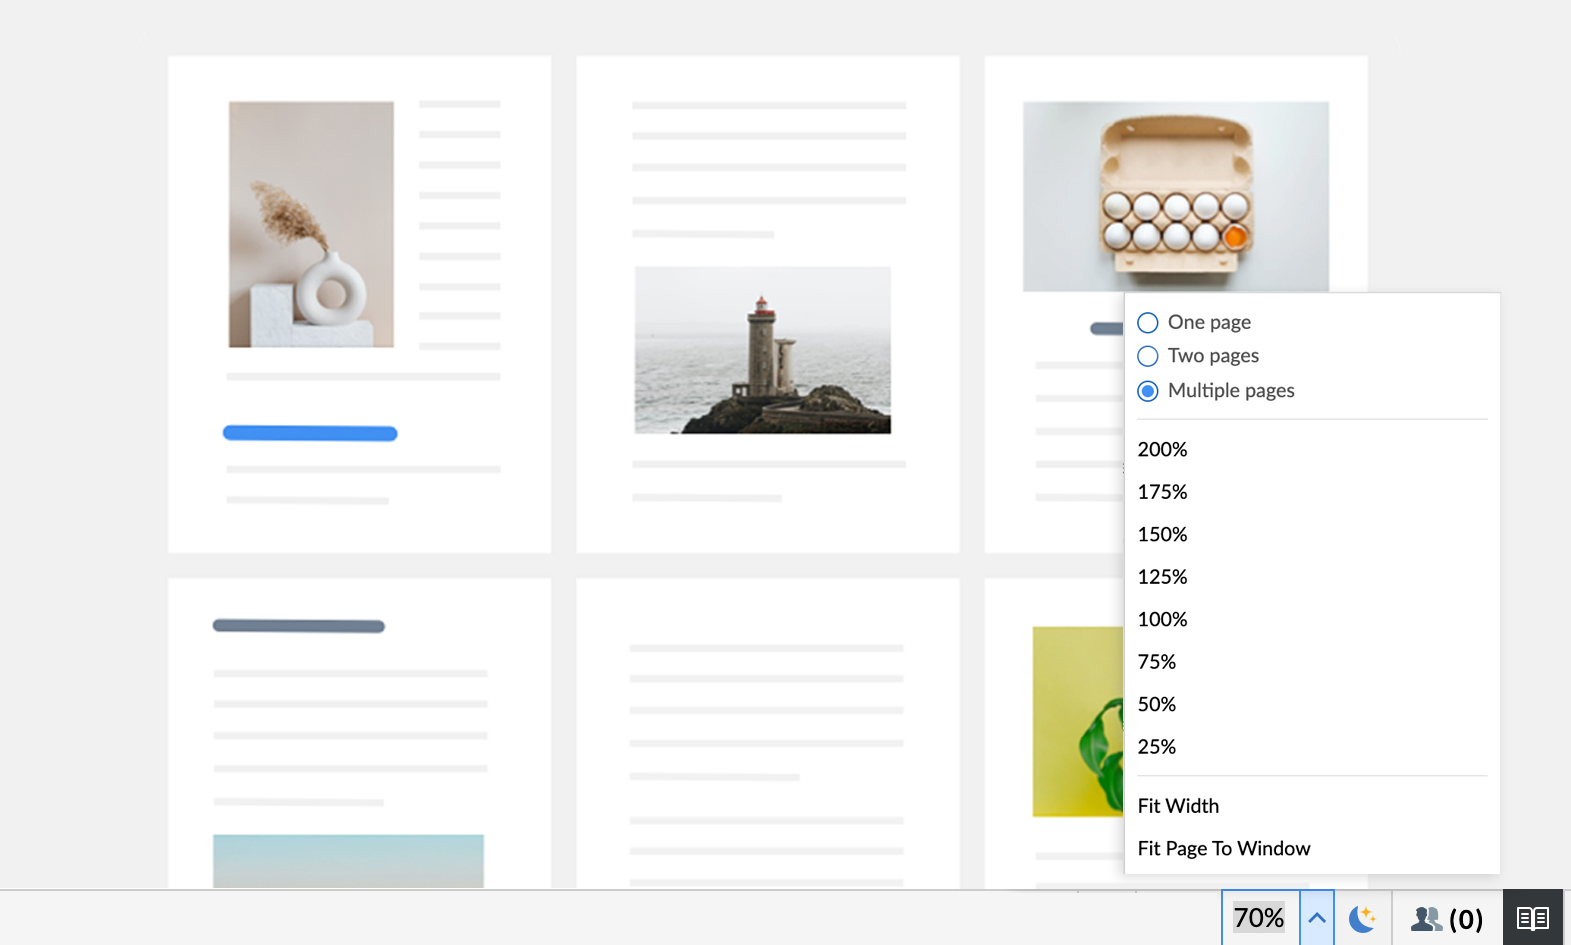 View and edit multiple pages in one go 